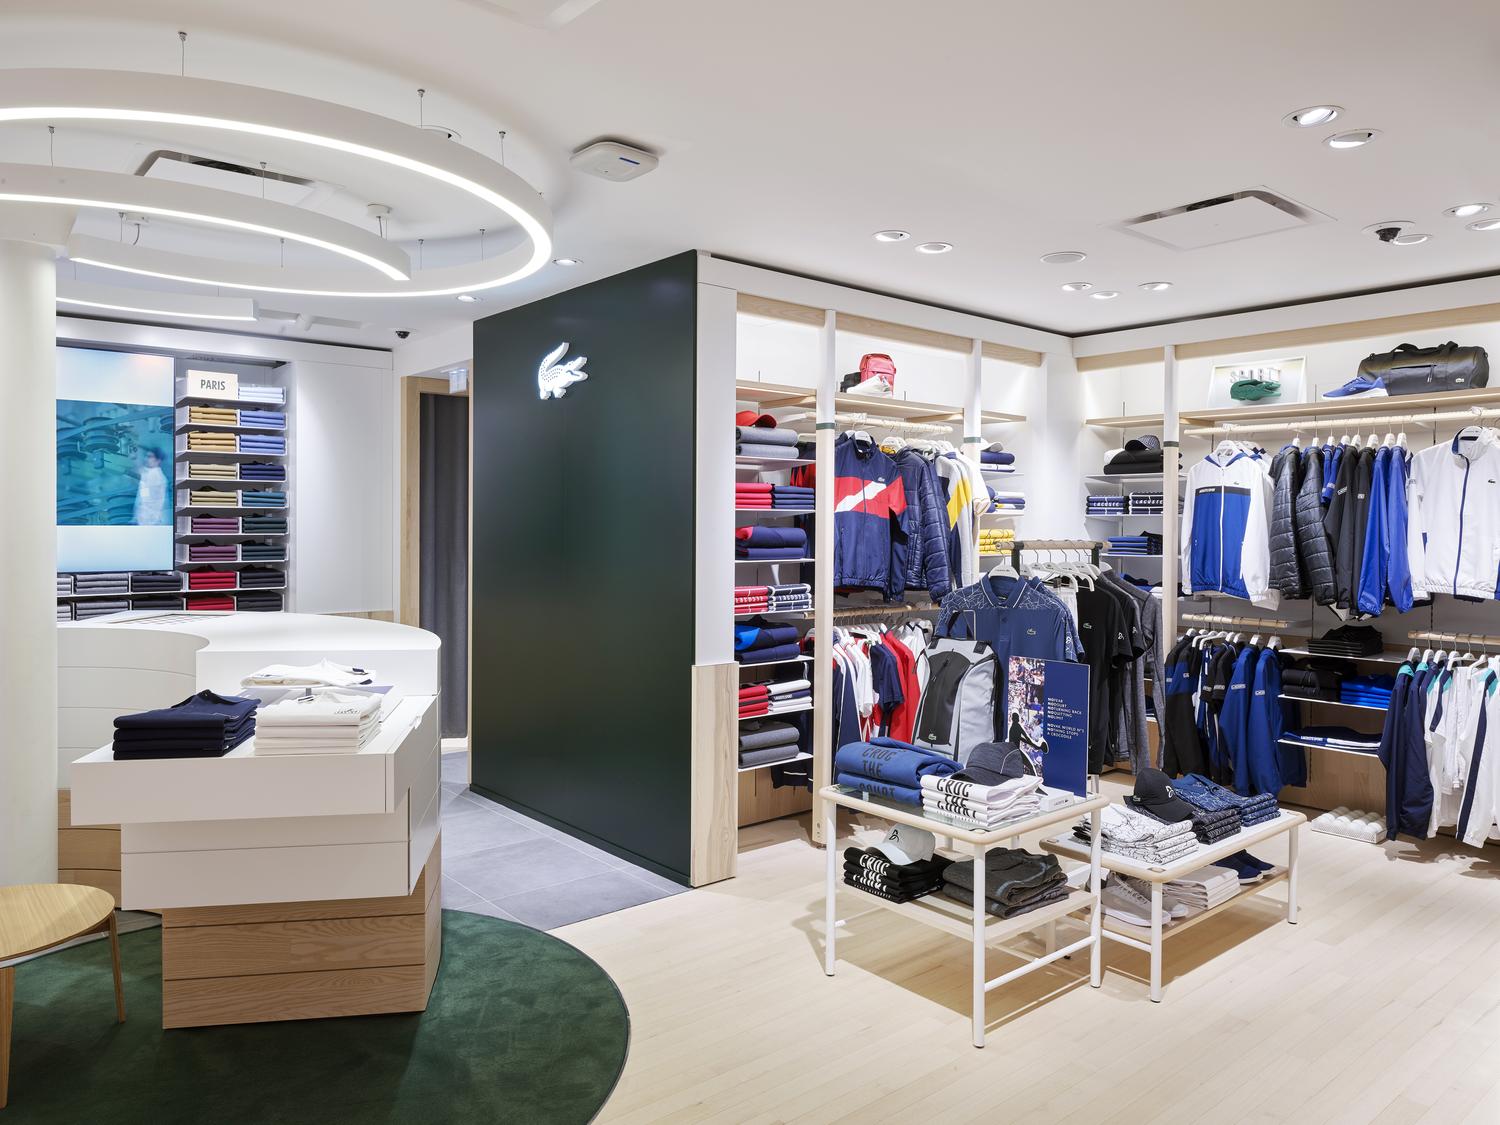 LACOSTE-MEDIA6-ATELIERS-NORMAND-RETAIL-SHOP-FITTING